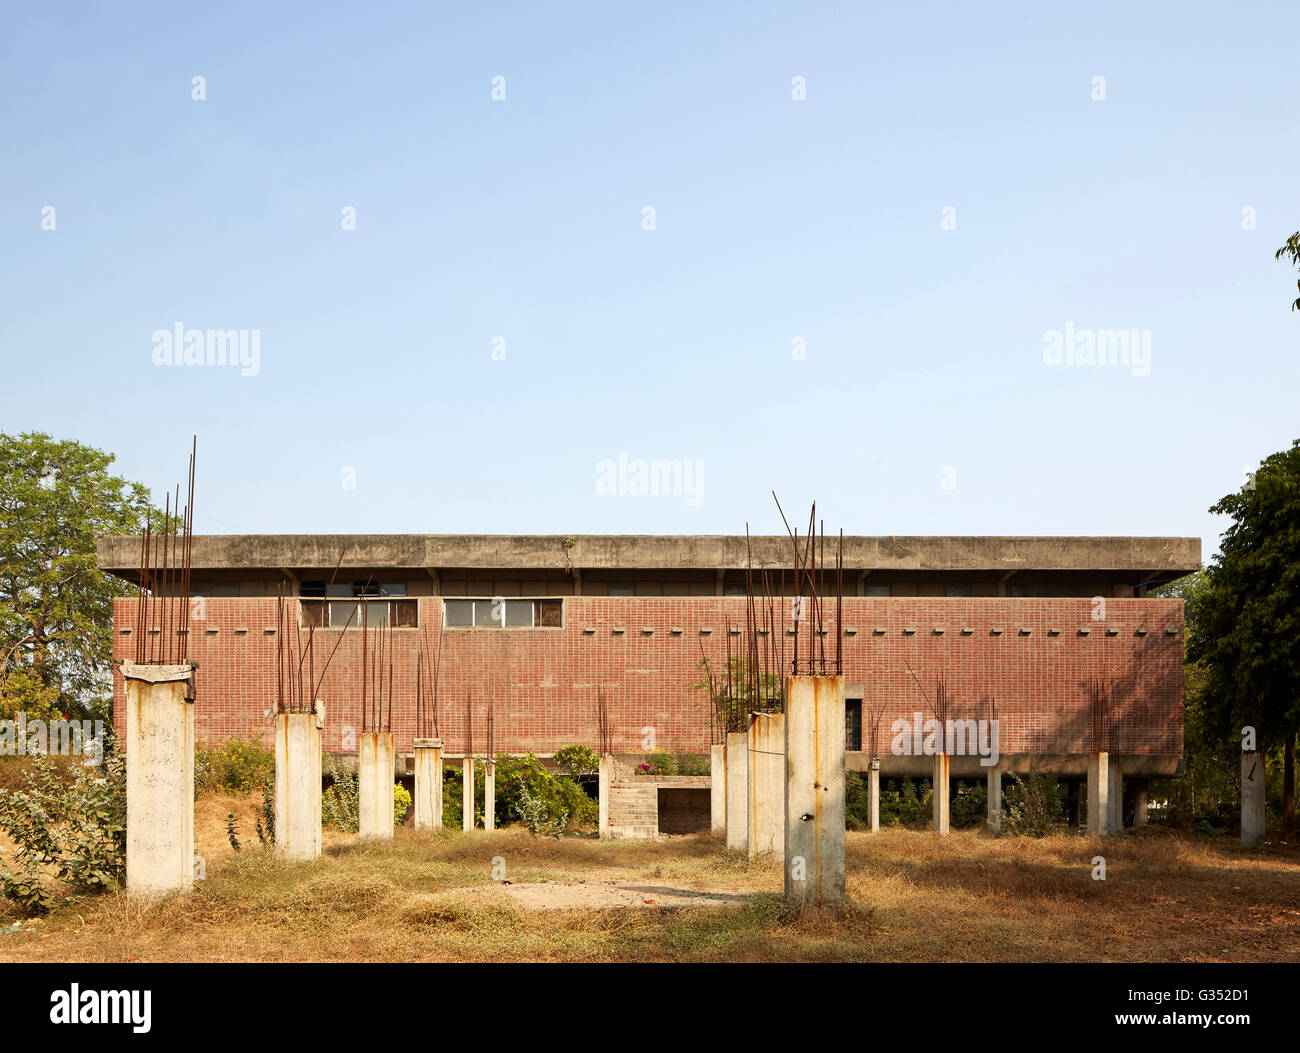 View from road with abandoned construction site in foreground. Sanskar Kendra, Ahmedabad, India. Architect: Le Corbusier , 1951. Stock Photo